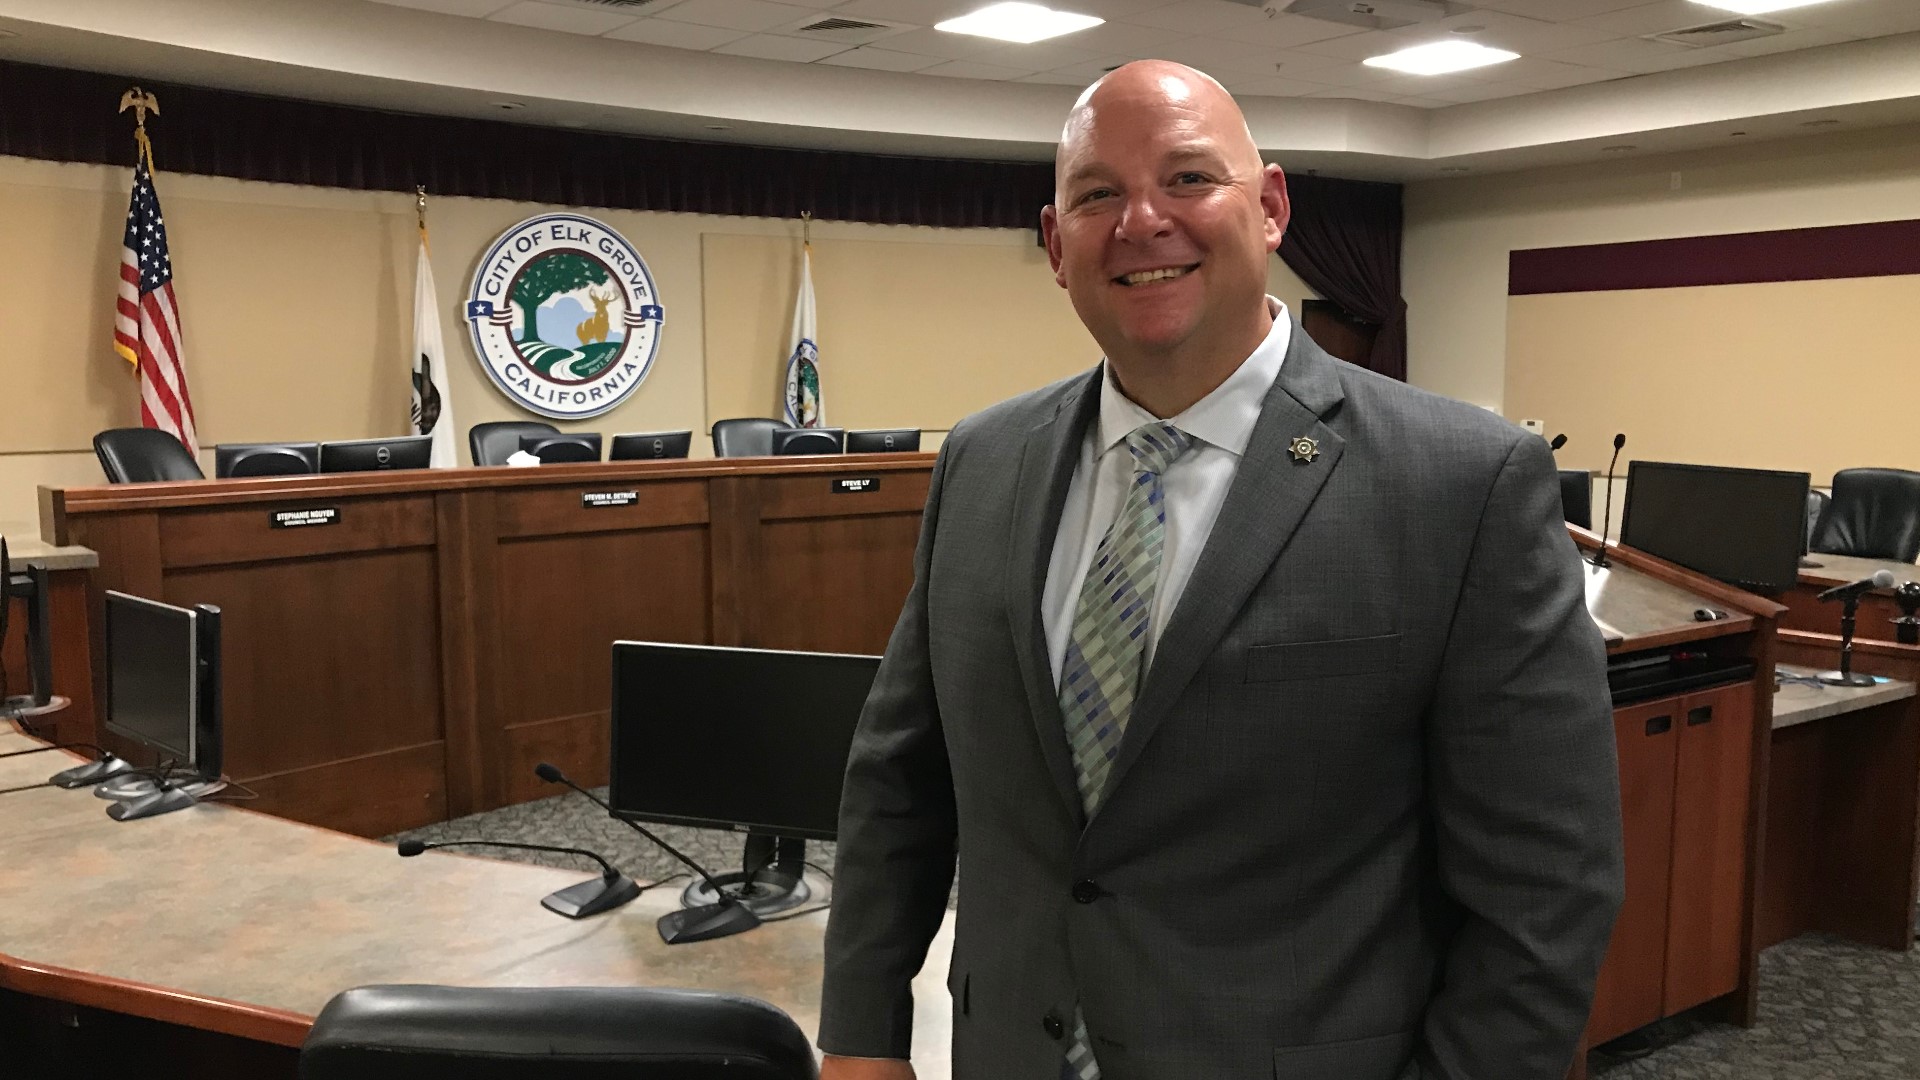 Timothy Albright has been a captain at the Elk Grove Police Department for the past three years. He has also been with the department since it formed more than a decade ago. Prior to that, he worked with the Sacramento County Sheriff's Department.